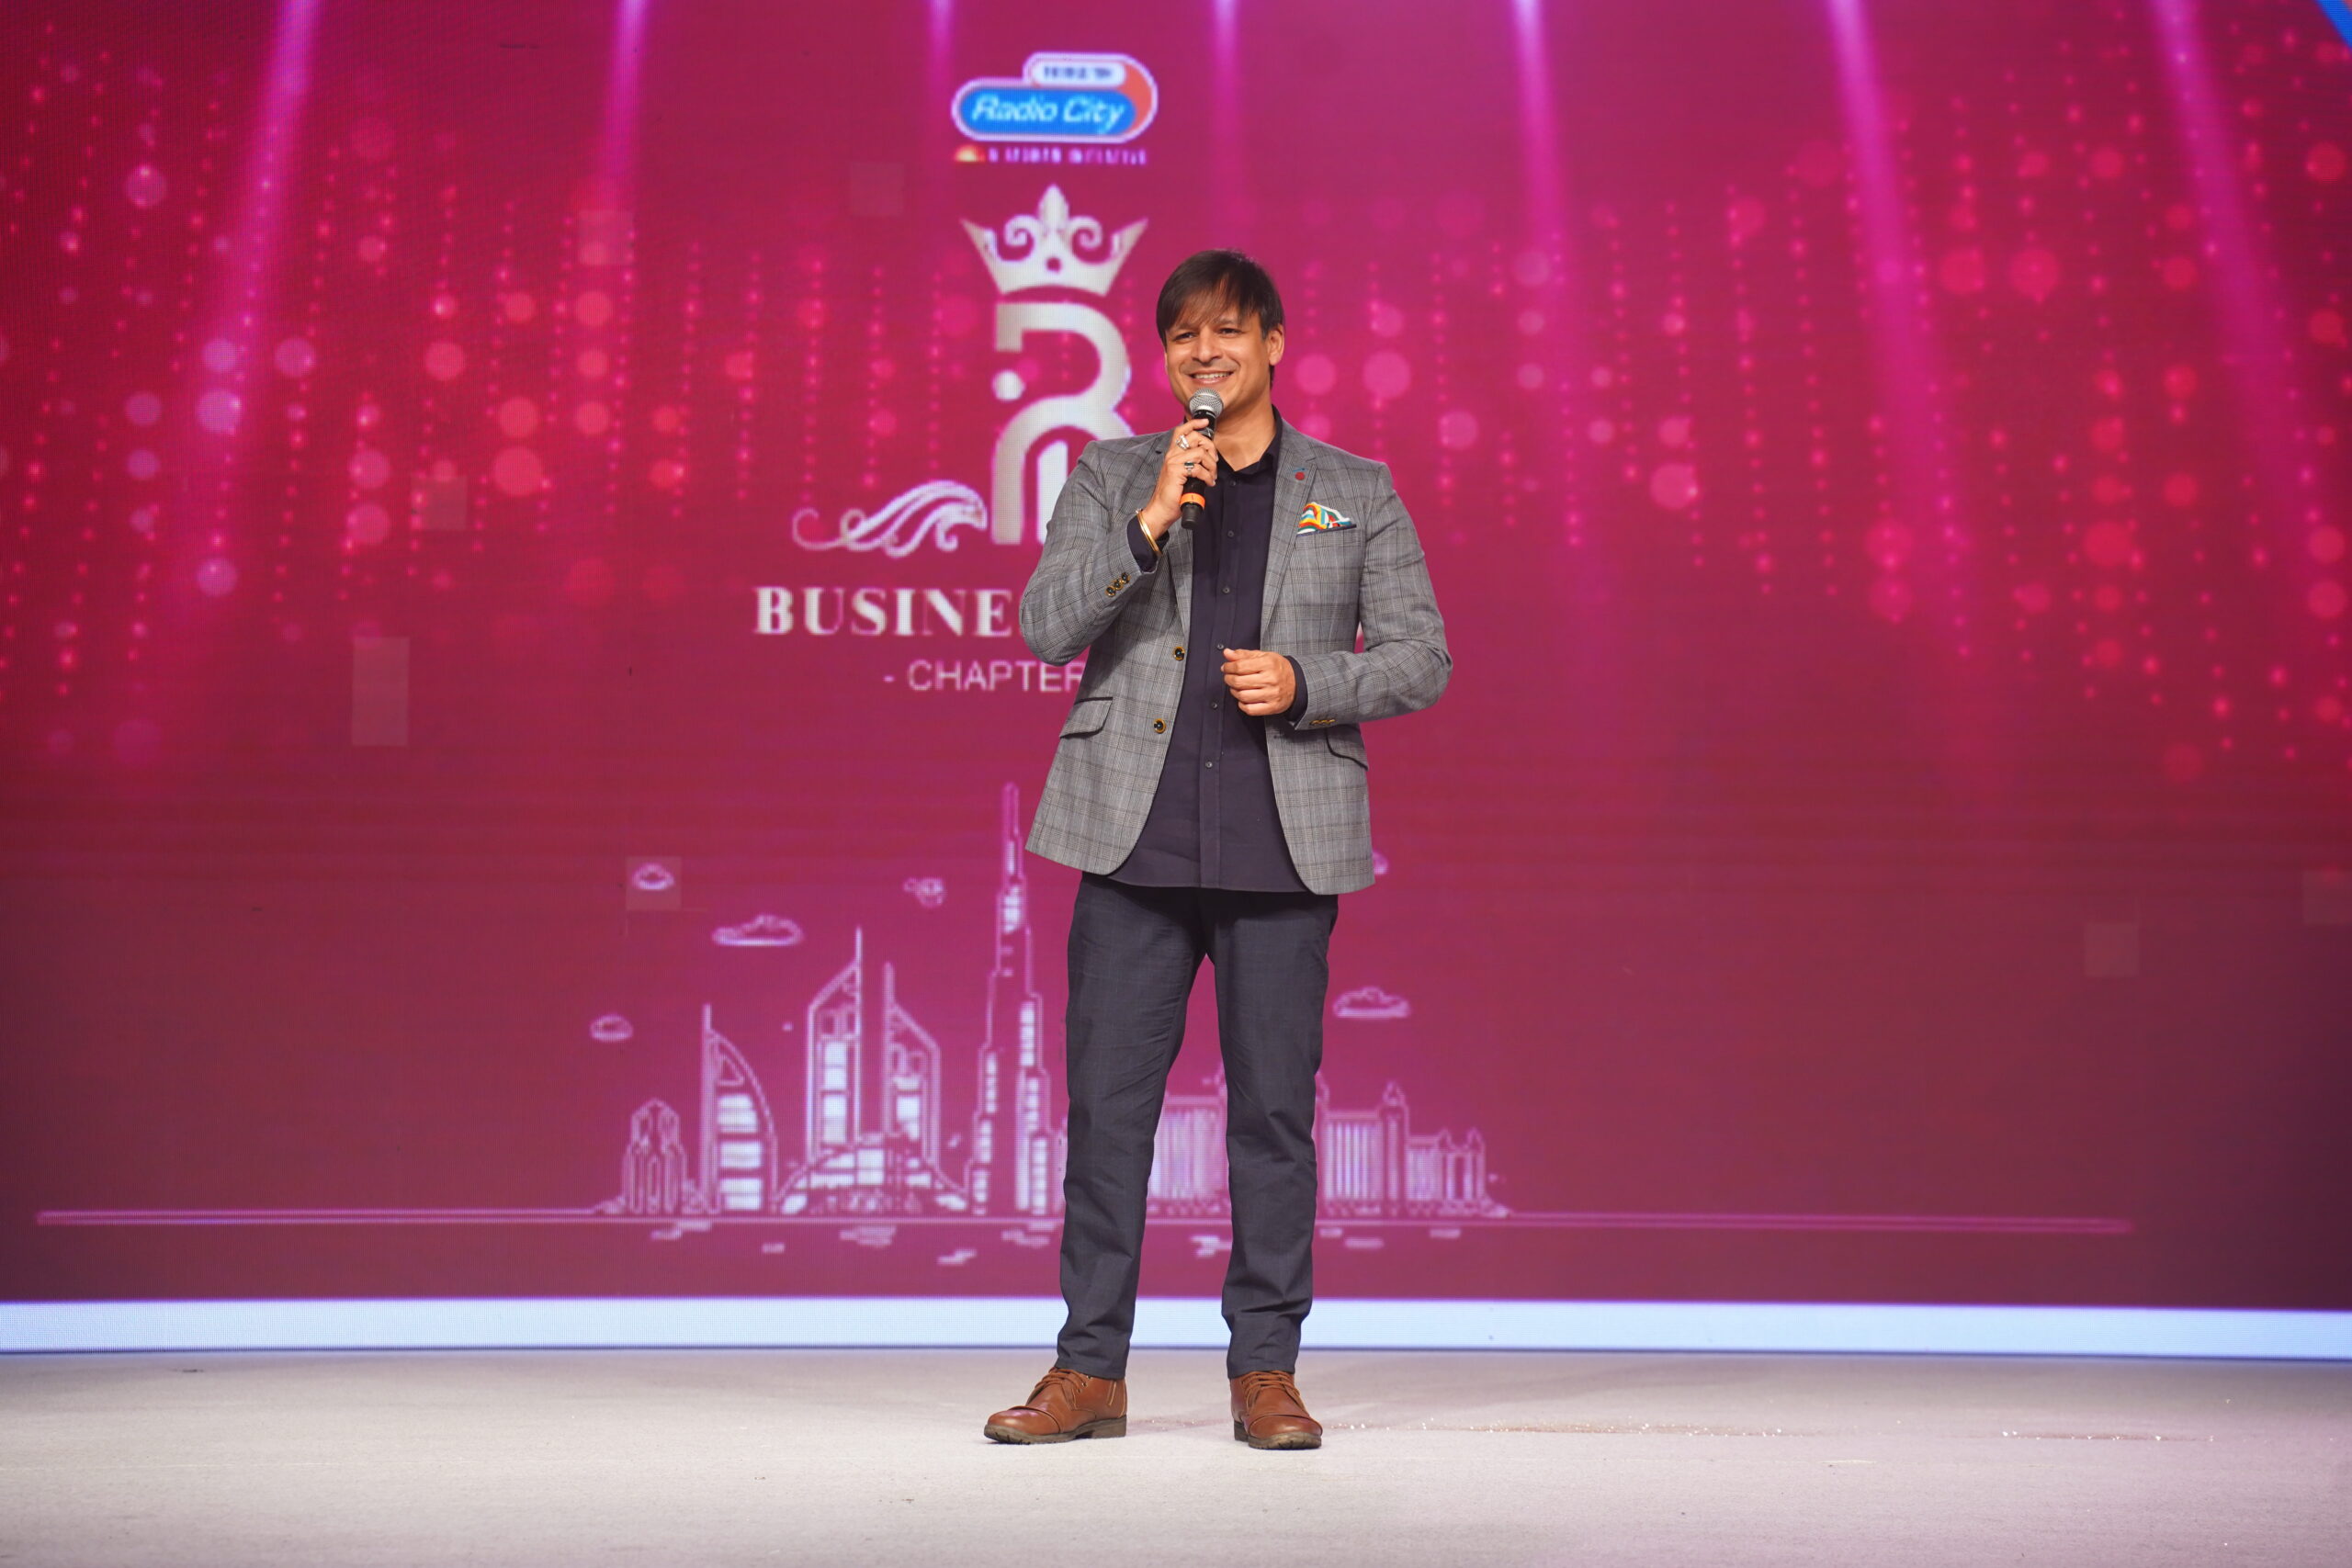 Vivek Oberoi for an appearance at a corporate event in Dubai